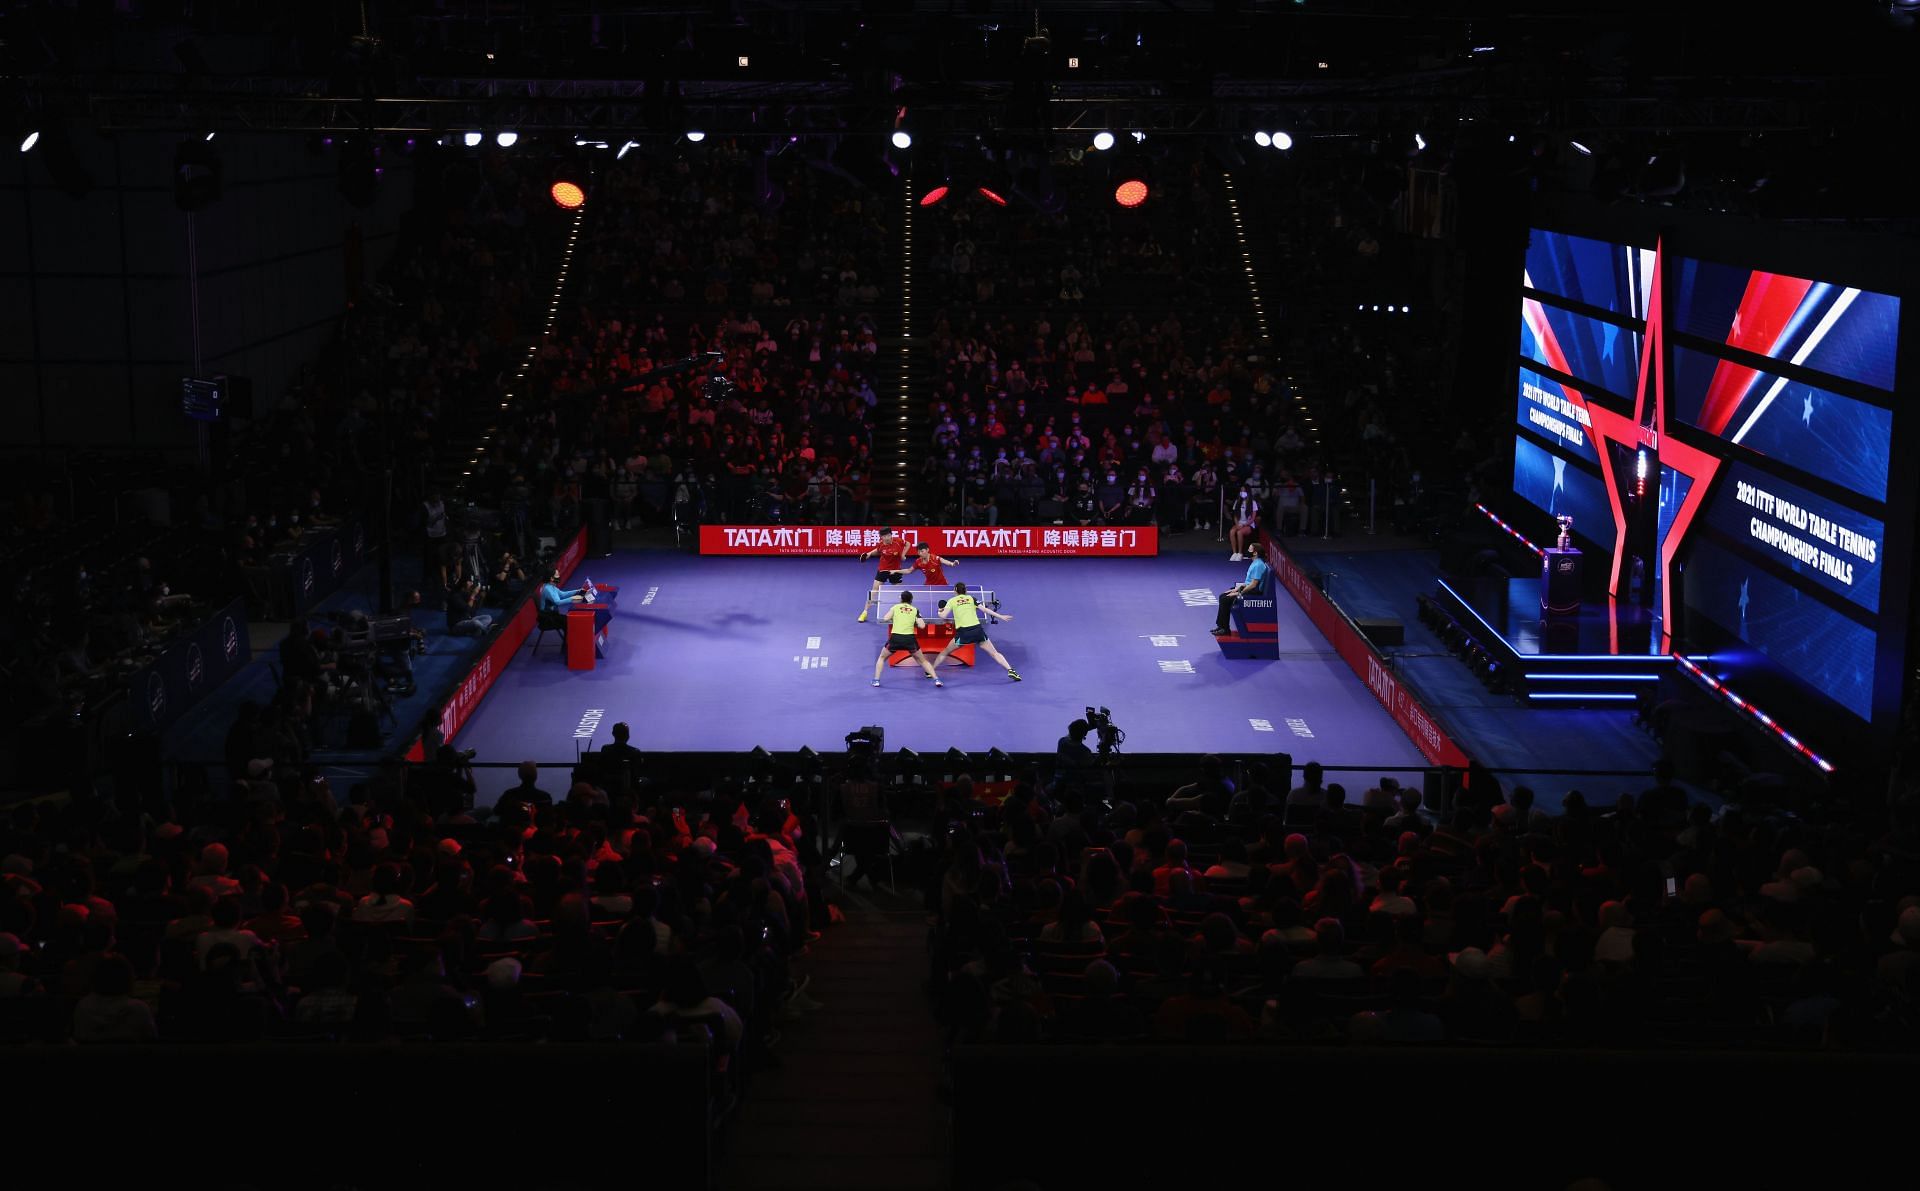 Representative image: A table tennis match in progress. (PC: Getty Images)